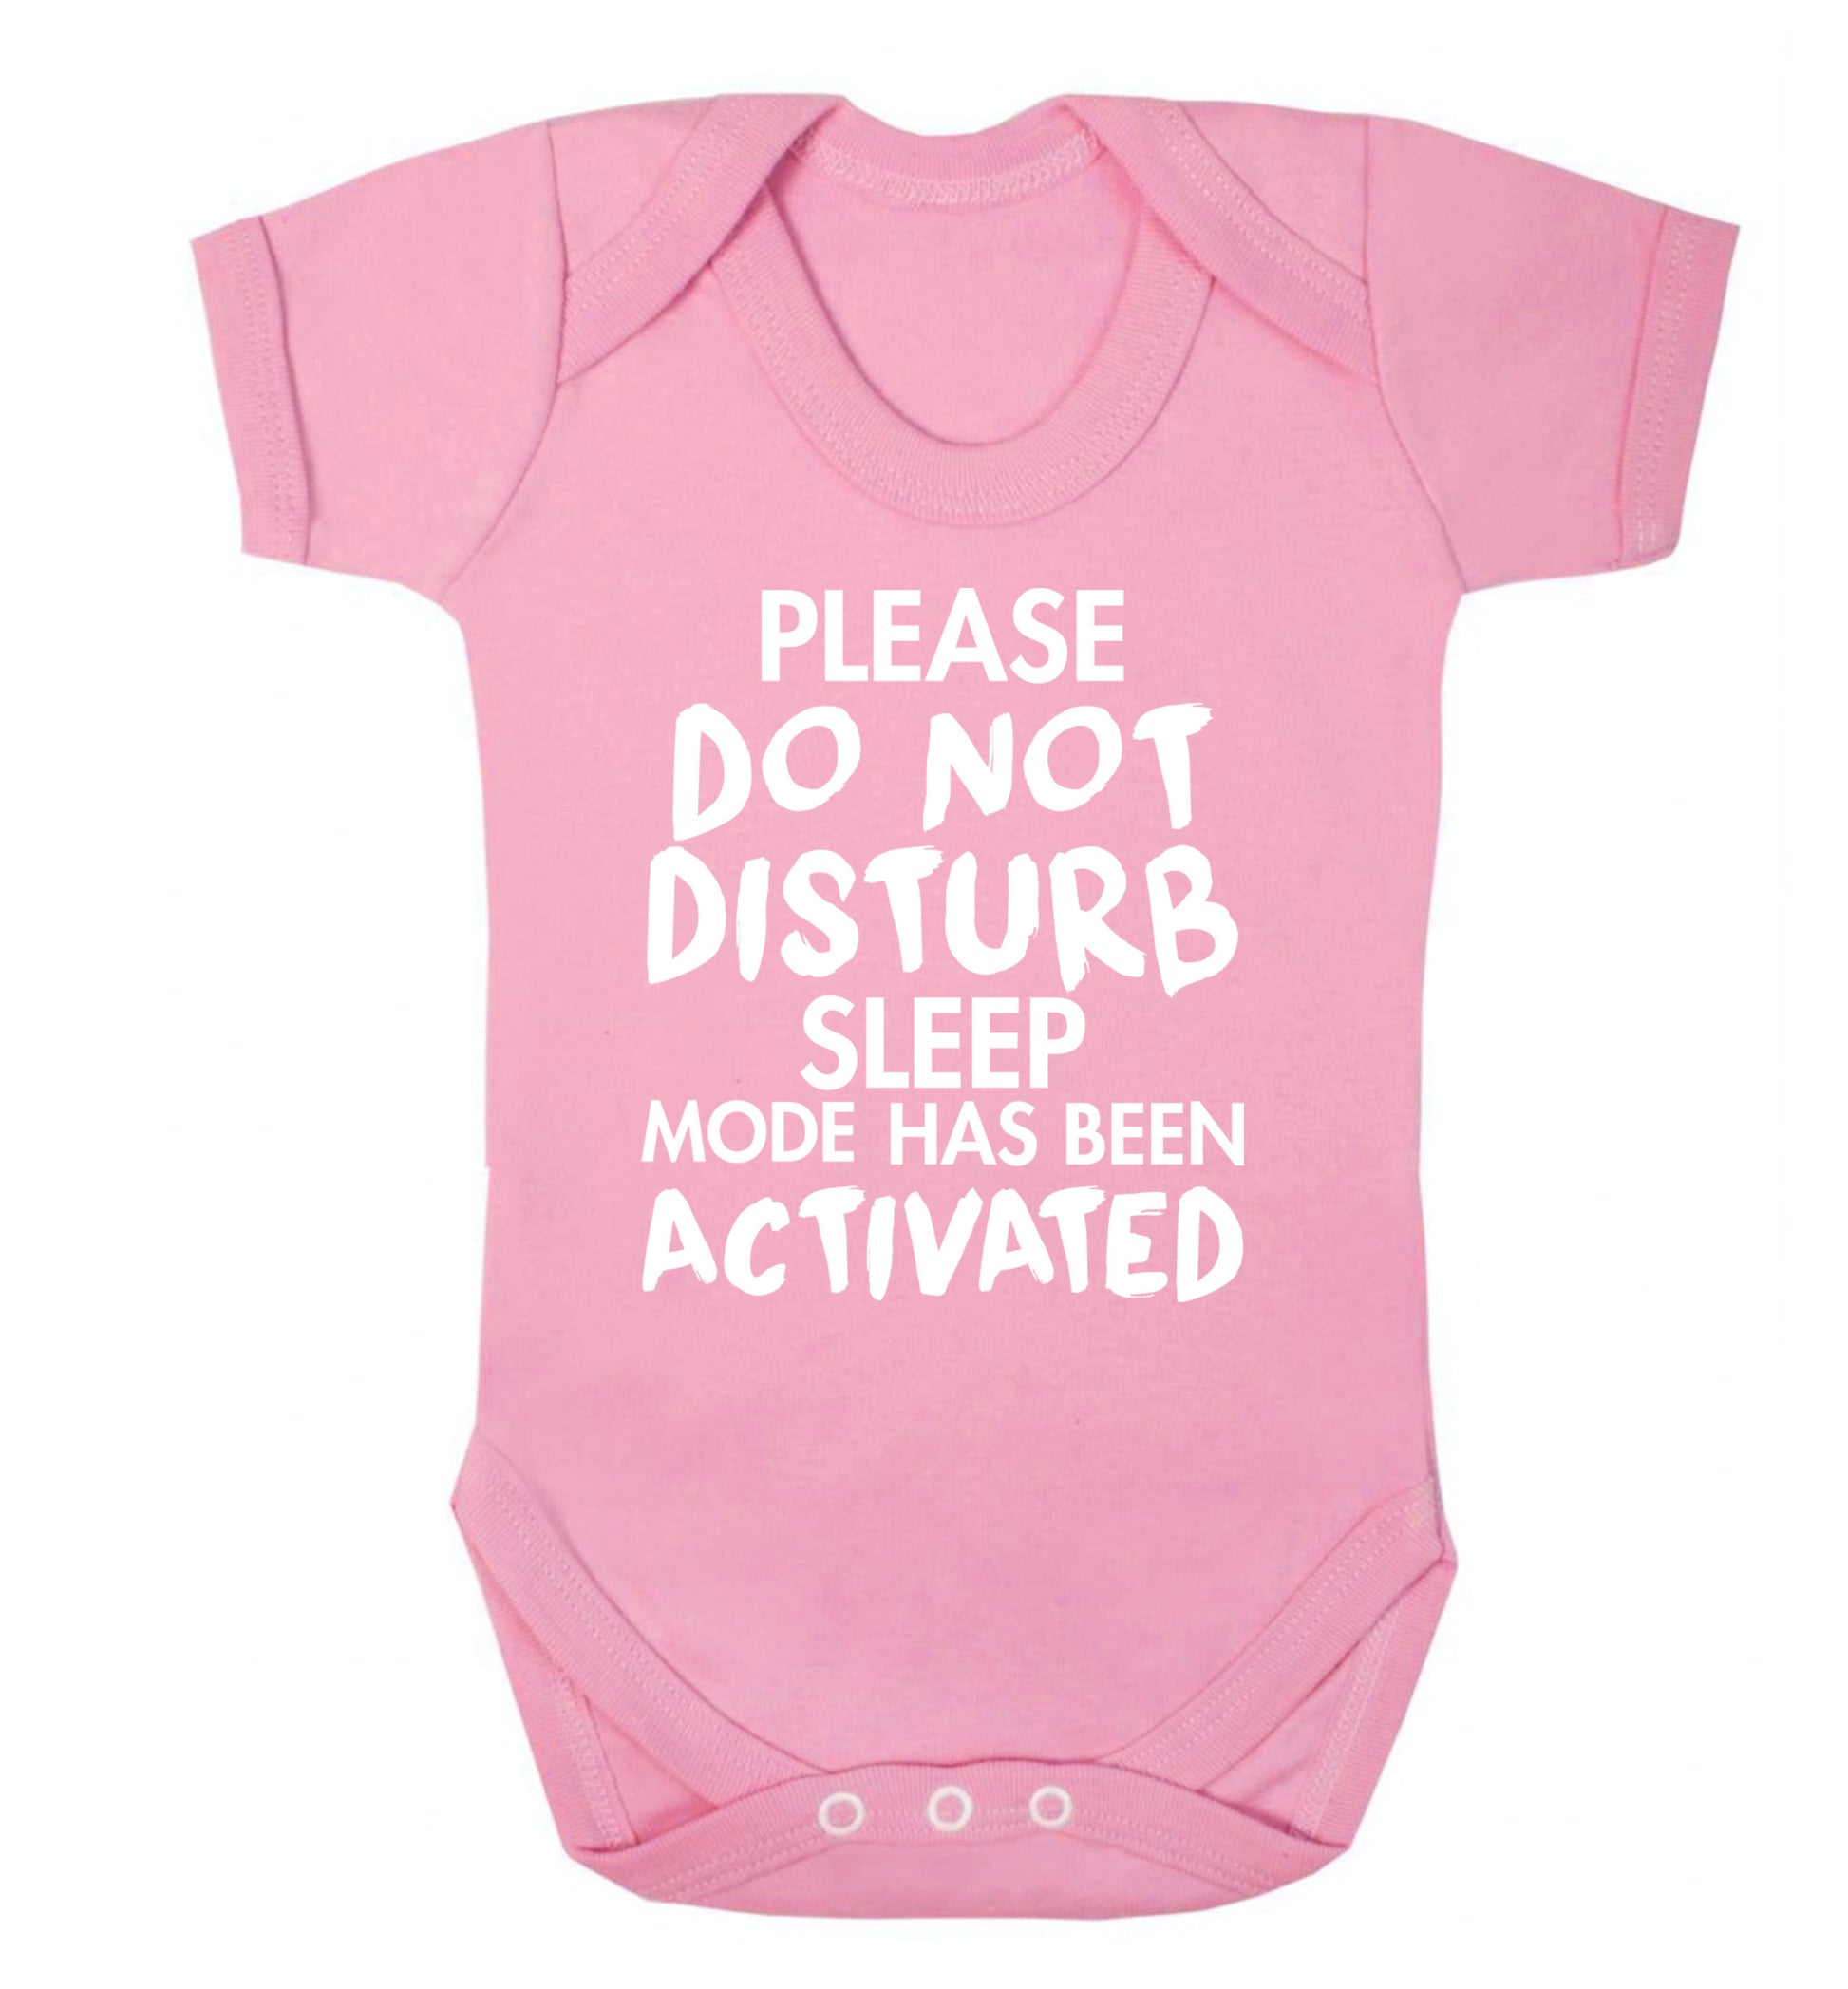 Please do not disturb sleeping mode has been activated Baby Vest pale pink 18-24 months